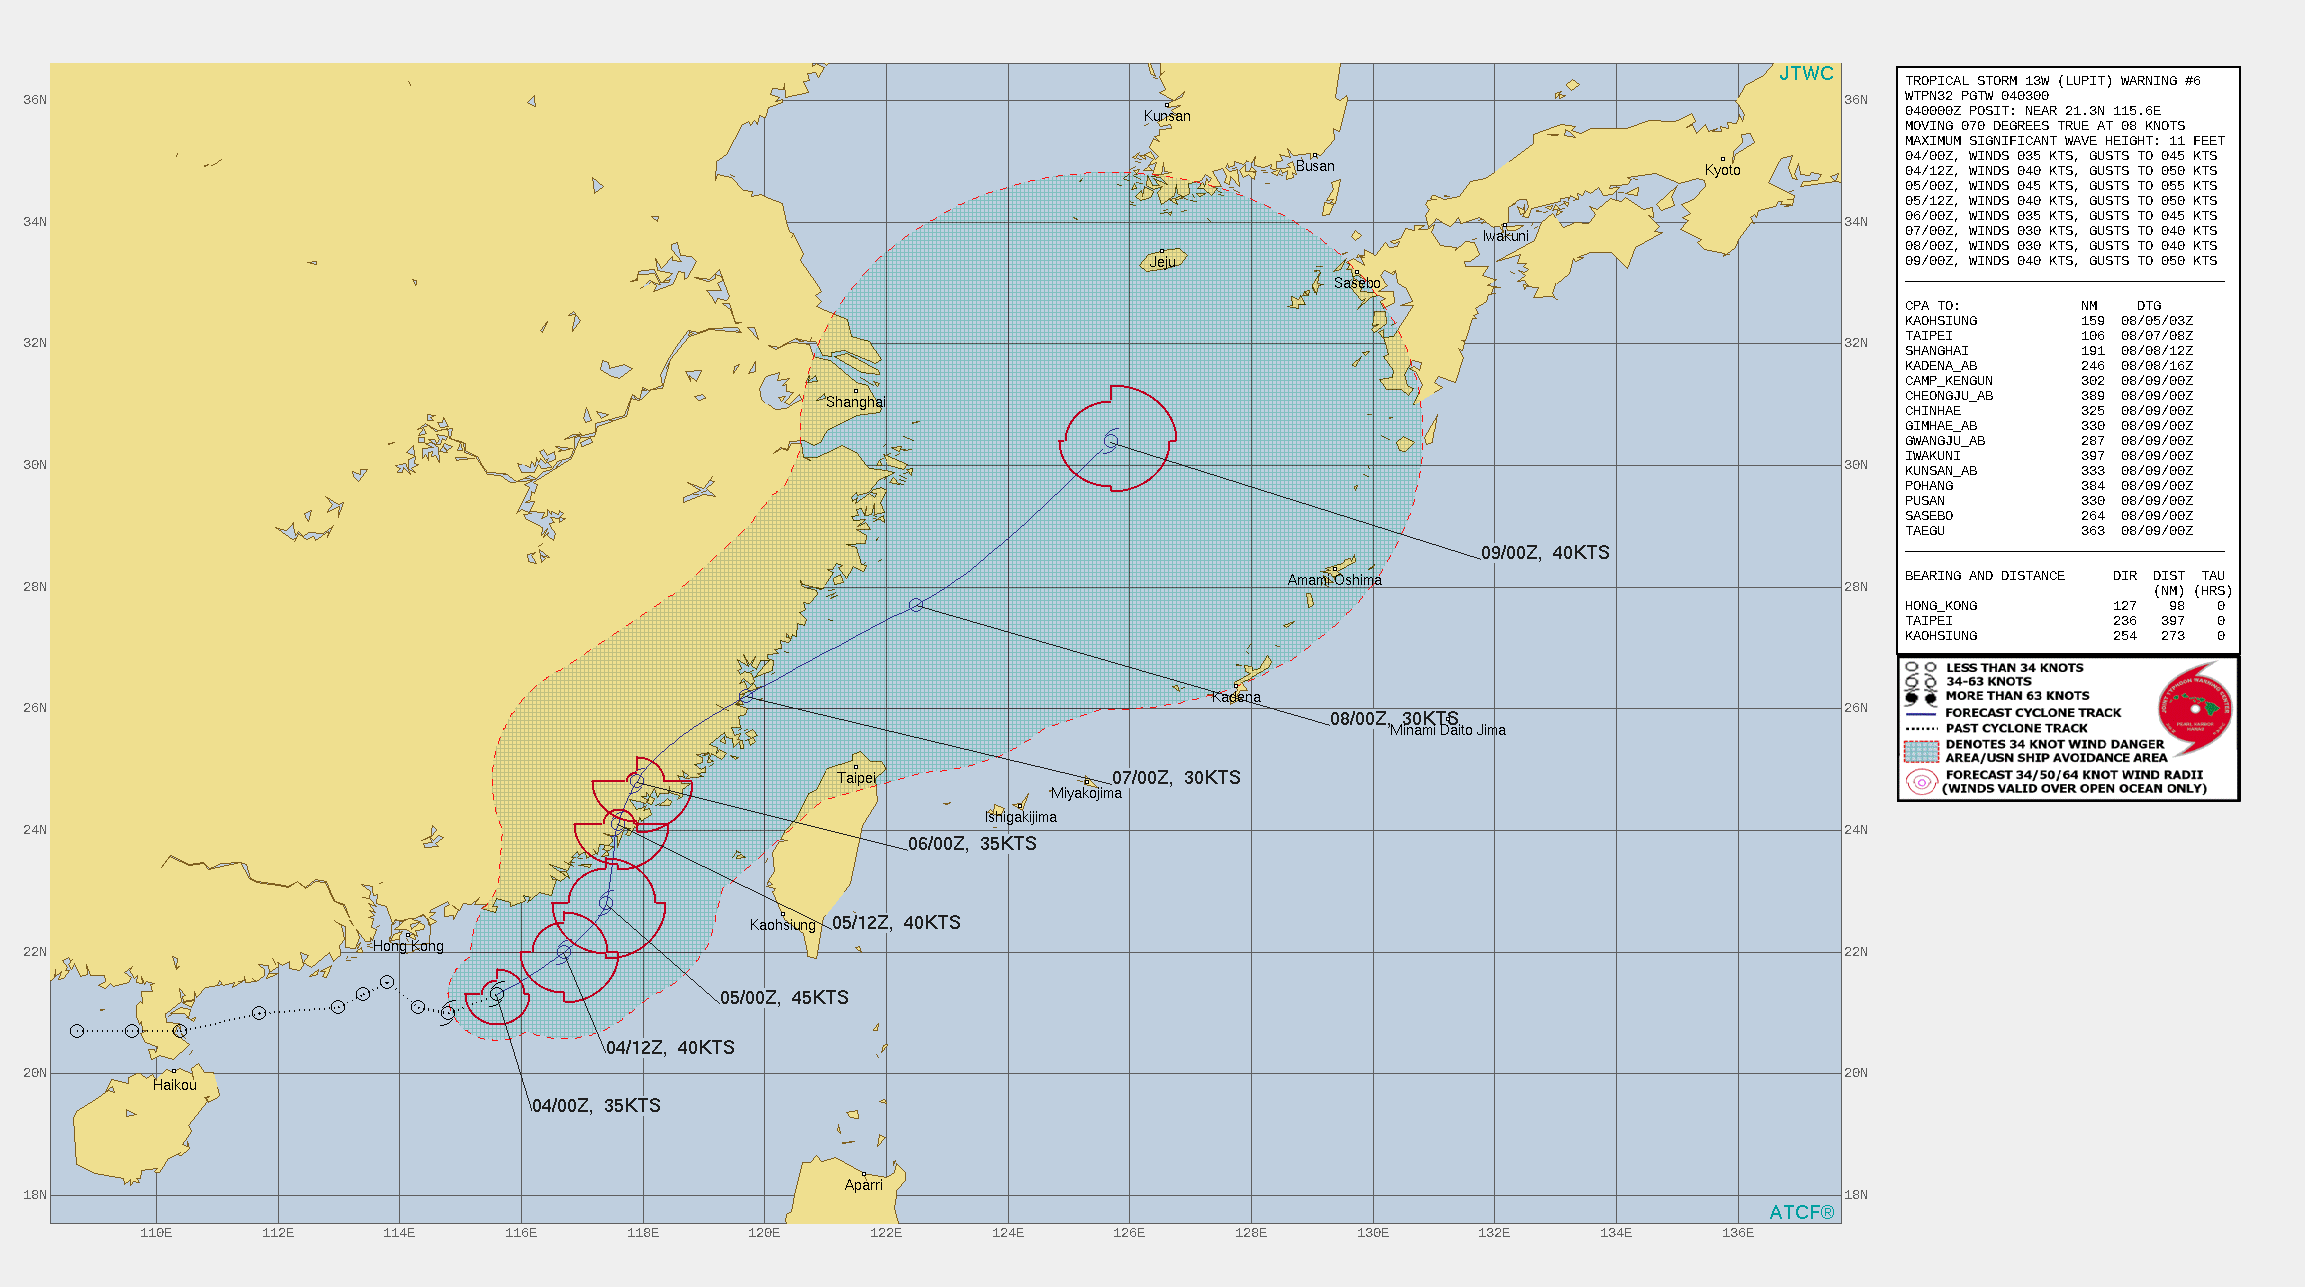 TS 13W(LUPIT). WARNING 6 ISSUED AT 04/03UTC.THERE ARE NO SIGNIFICANT CHANGES TO THE FORECAST FROM THE PREVIOUS WARNING.  FORECAST DISCUSSION: TS 13W WILL CONTINUE TO TRACK EAST-NORTHEASTWARD TRACK UNDER THE INFLUENCE OF A NEAR EQUATORIAL RIDGE(NER) TO THE SOUTHEAST. AS THE NER BUILDS, THE SYSTEM WILL BEGIN TO TURN NORTHWARD AND WILL CROSS OVER THE COAST OF CHINA BY 36H. THE MARGINALLY FAVORABLE ENVIRONMENT WILL ALLOW A SLIGHT  INTENSIFICATION TO 45KNOTS BEFORE MAKING LANDFALL. LAND INTERACTION  WILL CAUSE A SLIGHT WEAKENING IN INTENSITY BEFORE TS 13W CROSSES  BACK OVER WATER AROUND 72H. AT THIS POINT, THE SYSTEM WILL RESUME  A NORTHEASTWARD TRACK TOWARDS THE YELLOW SEA.